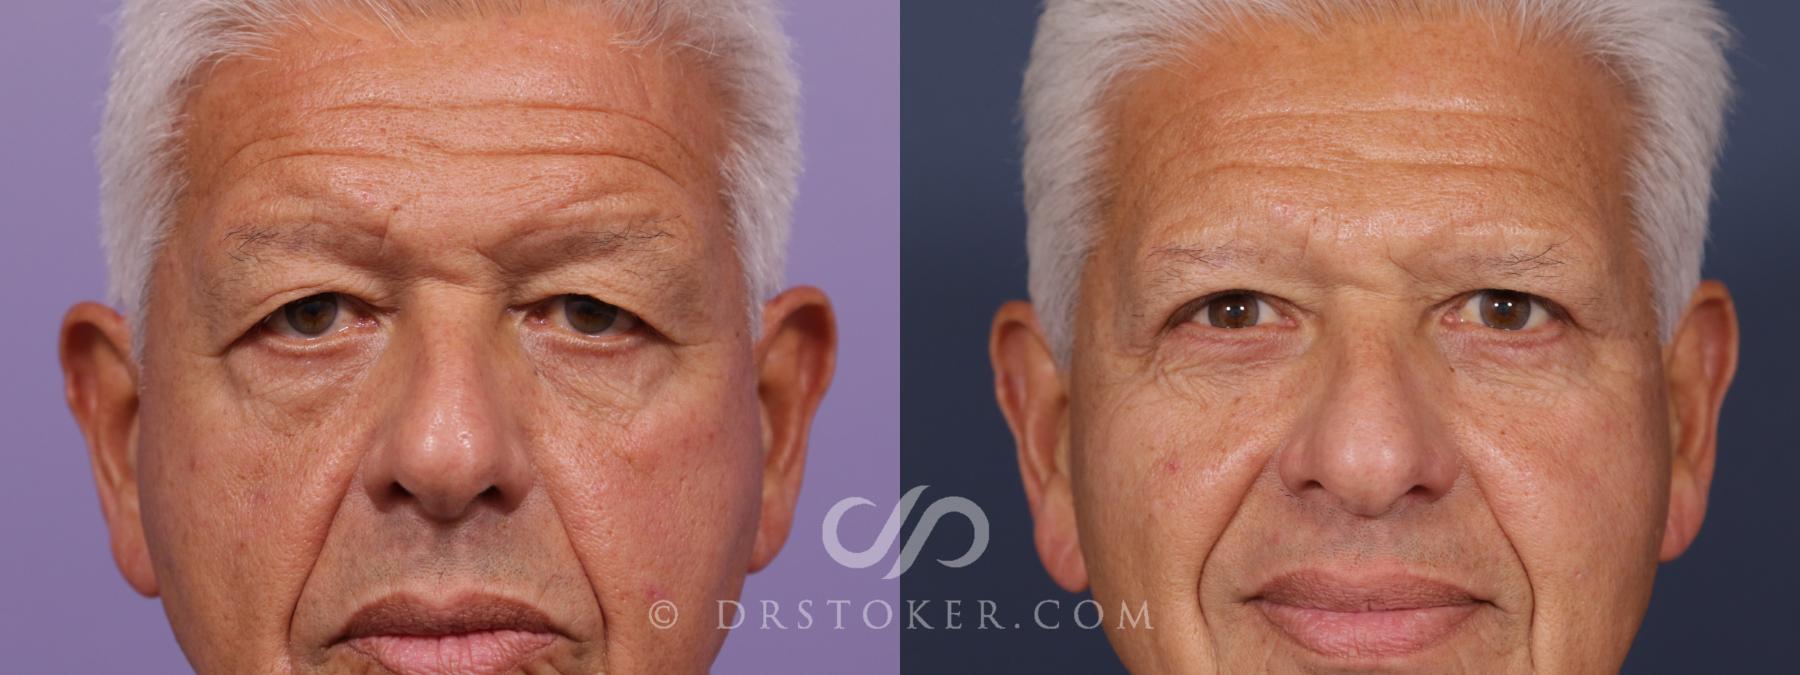 Before & After Eyelid Surgery for Men Case 2094 Front View in Los Angeles, CA